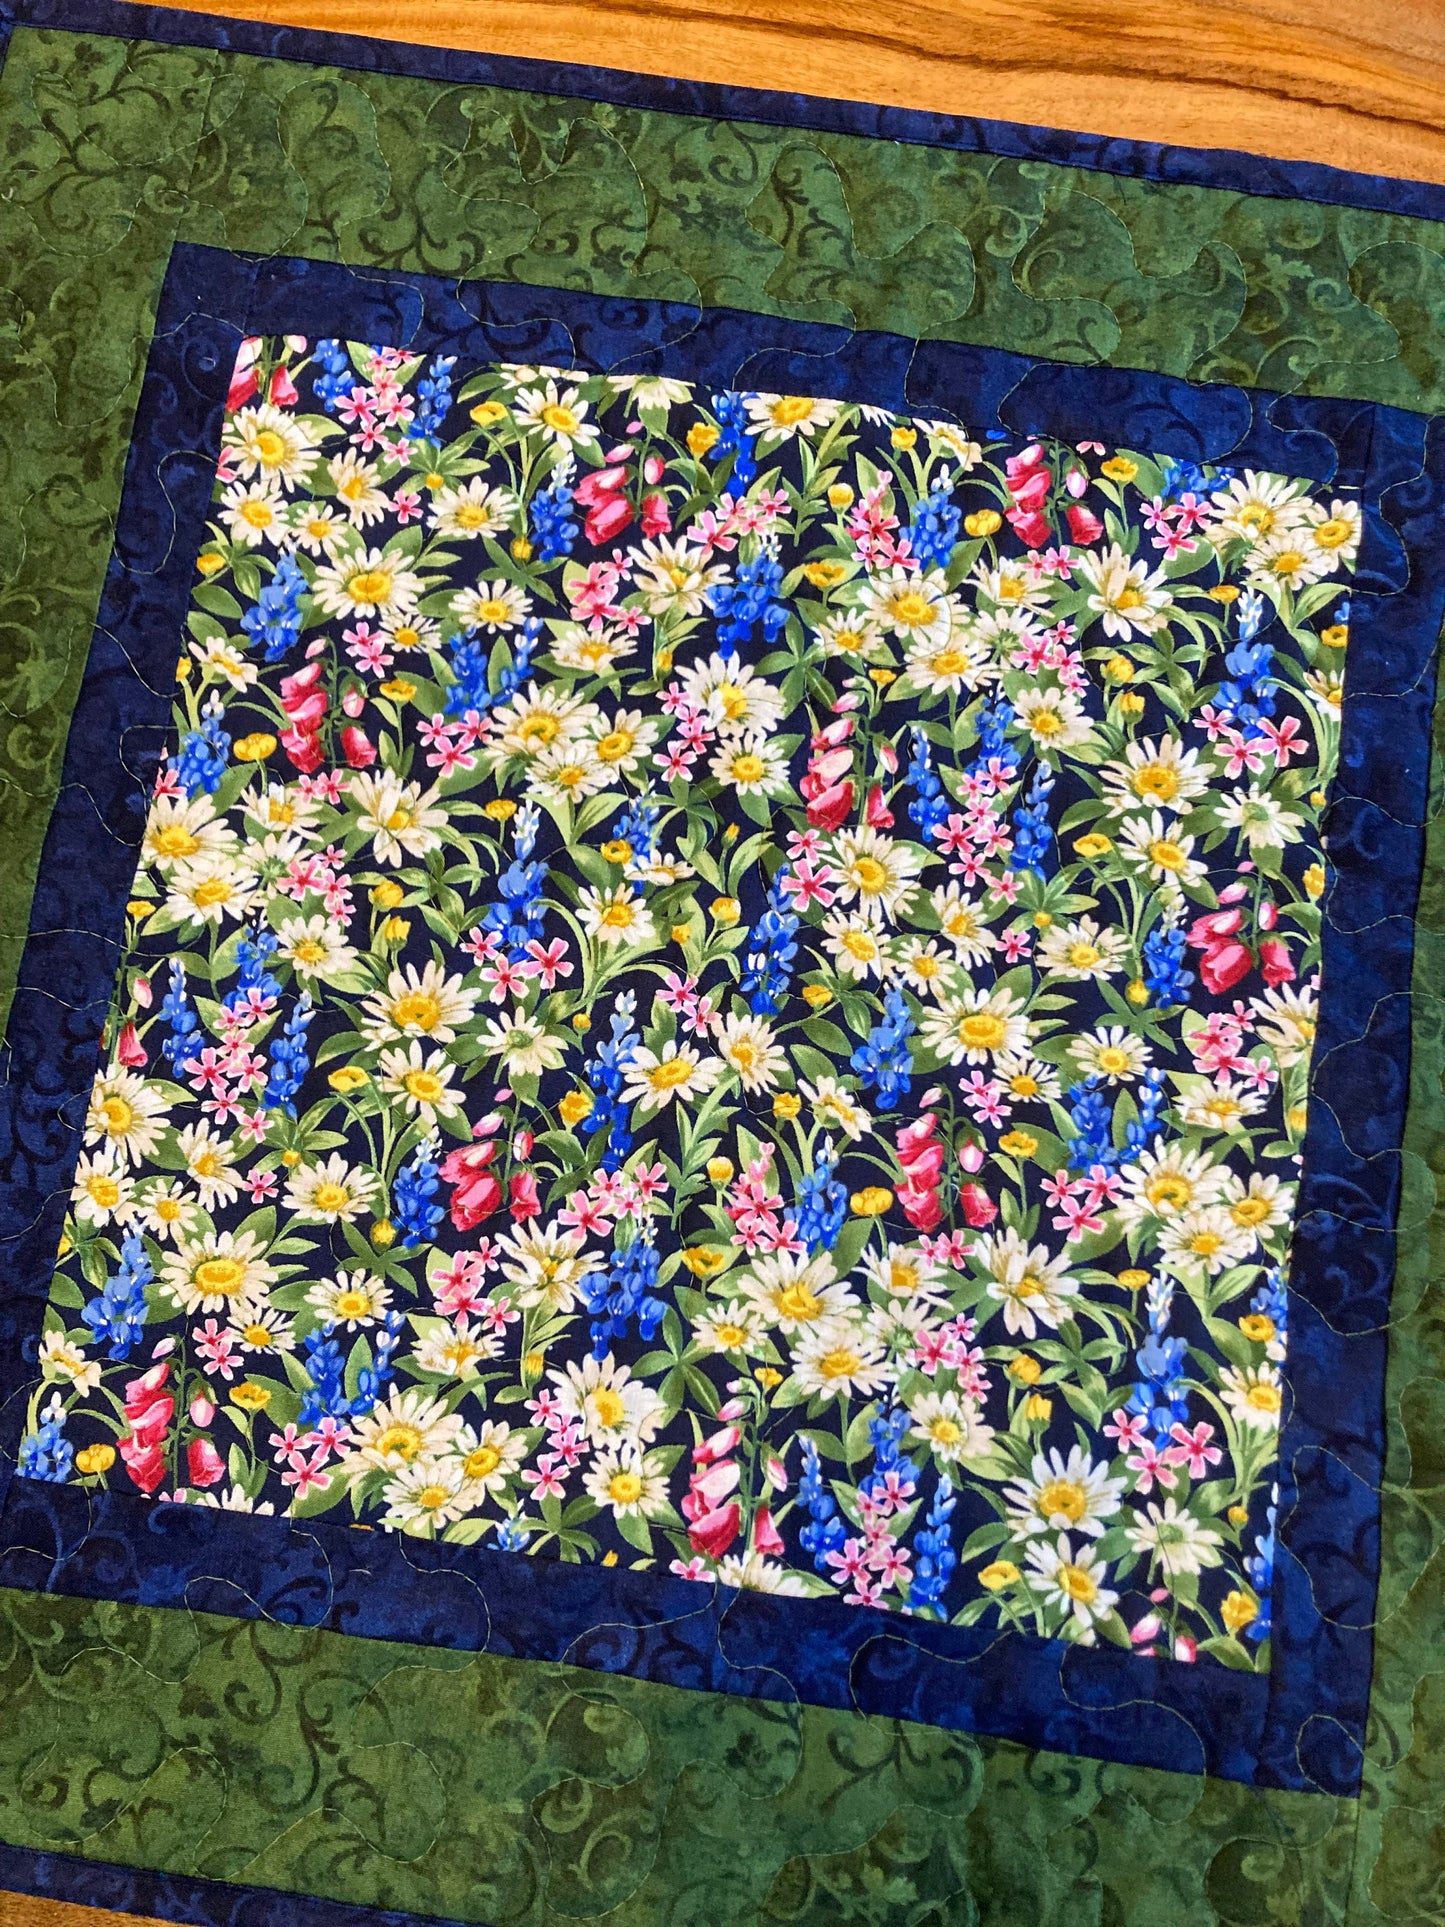 Garden Daisy Blue Bonnet Snapdragon Quilted Table Topper, Large Square Coffee Table Reversible 20x20" Summer End Table, Everyday Kitchen